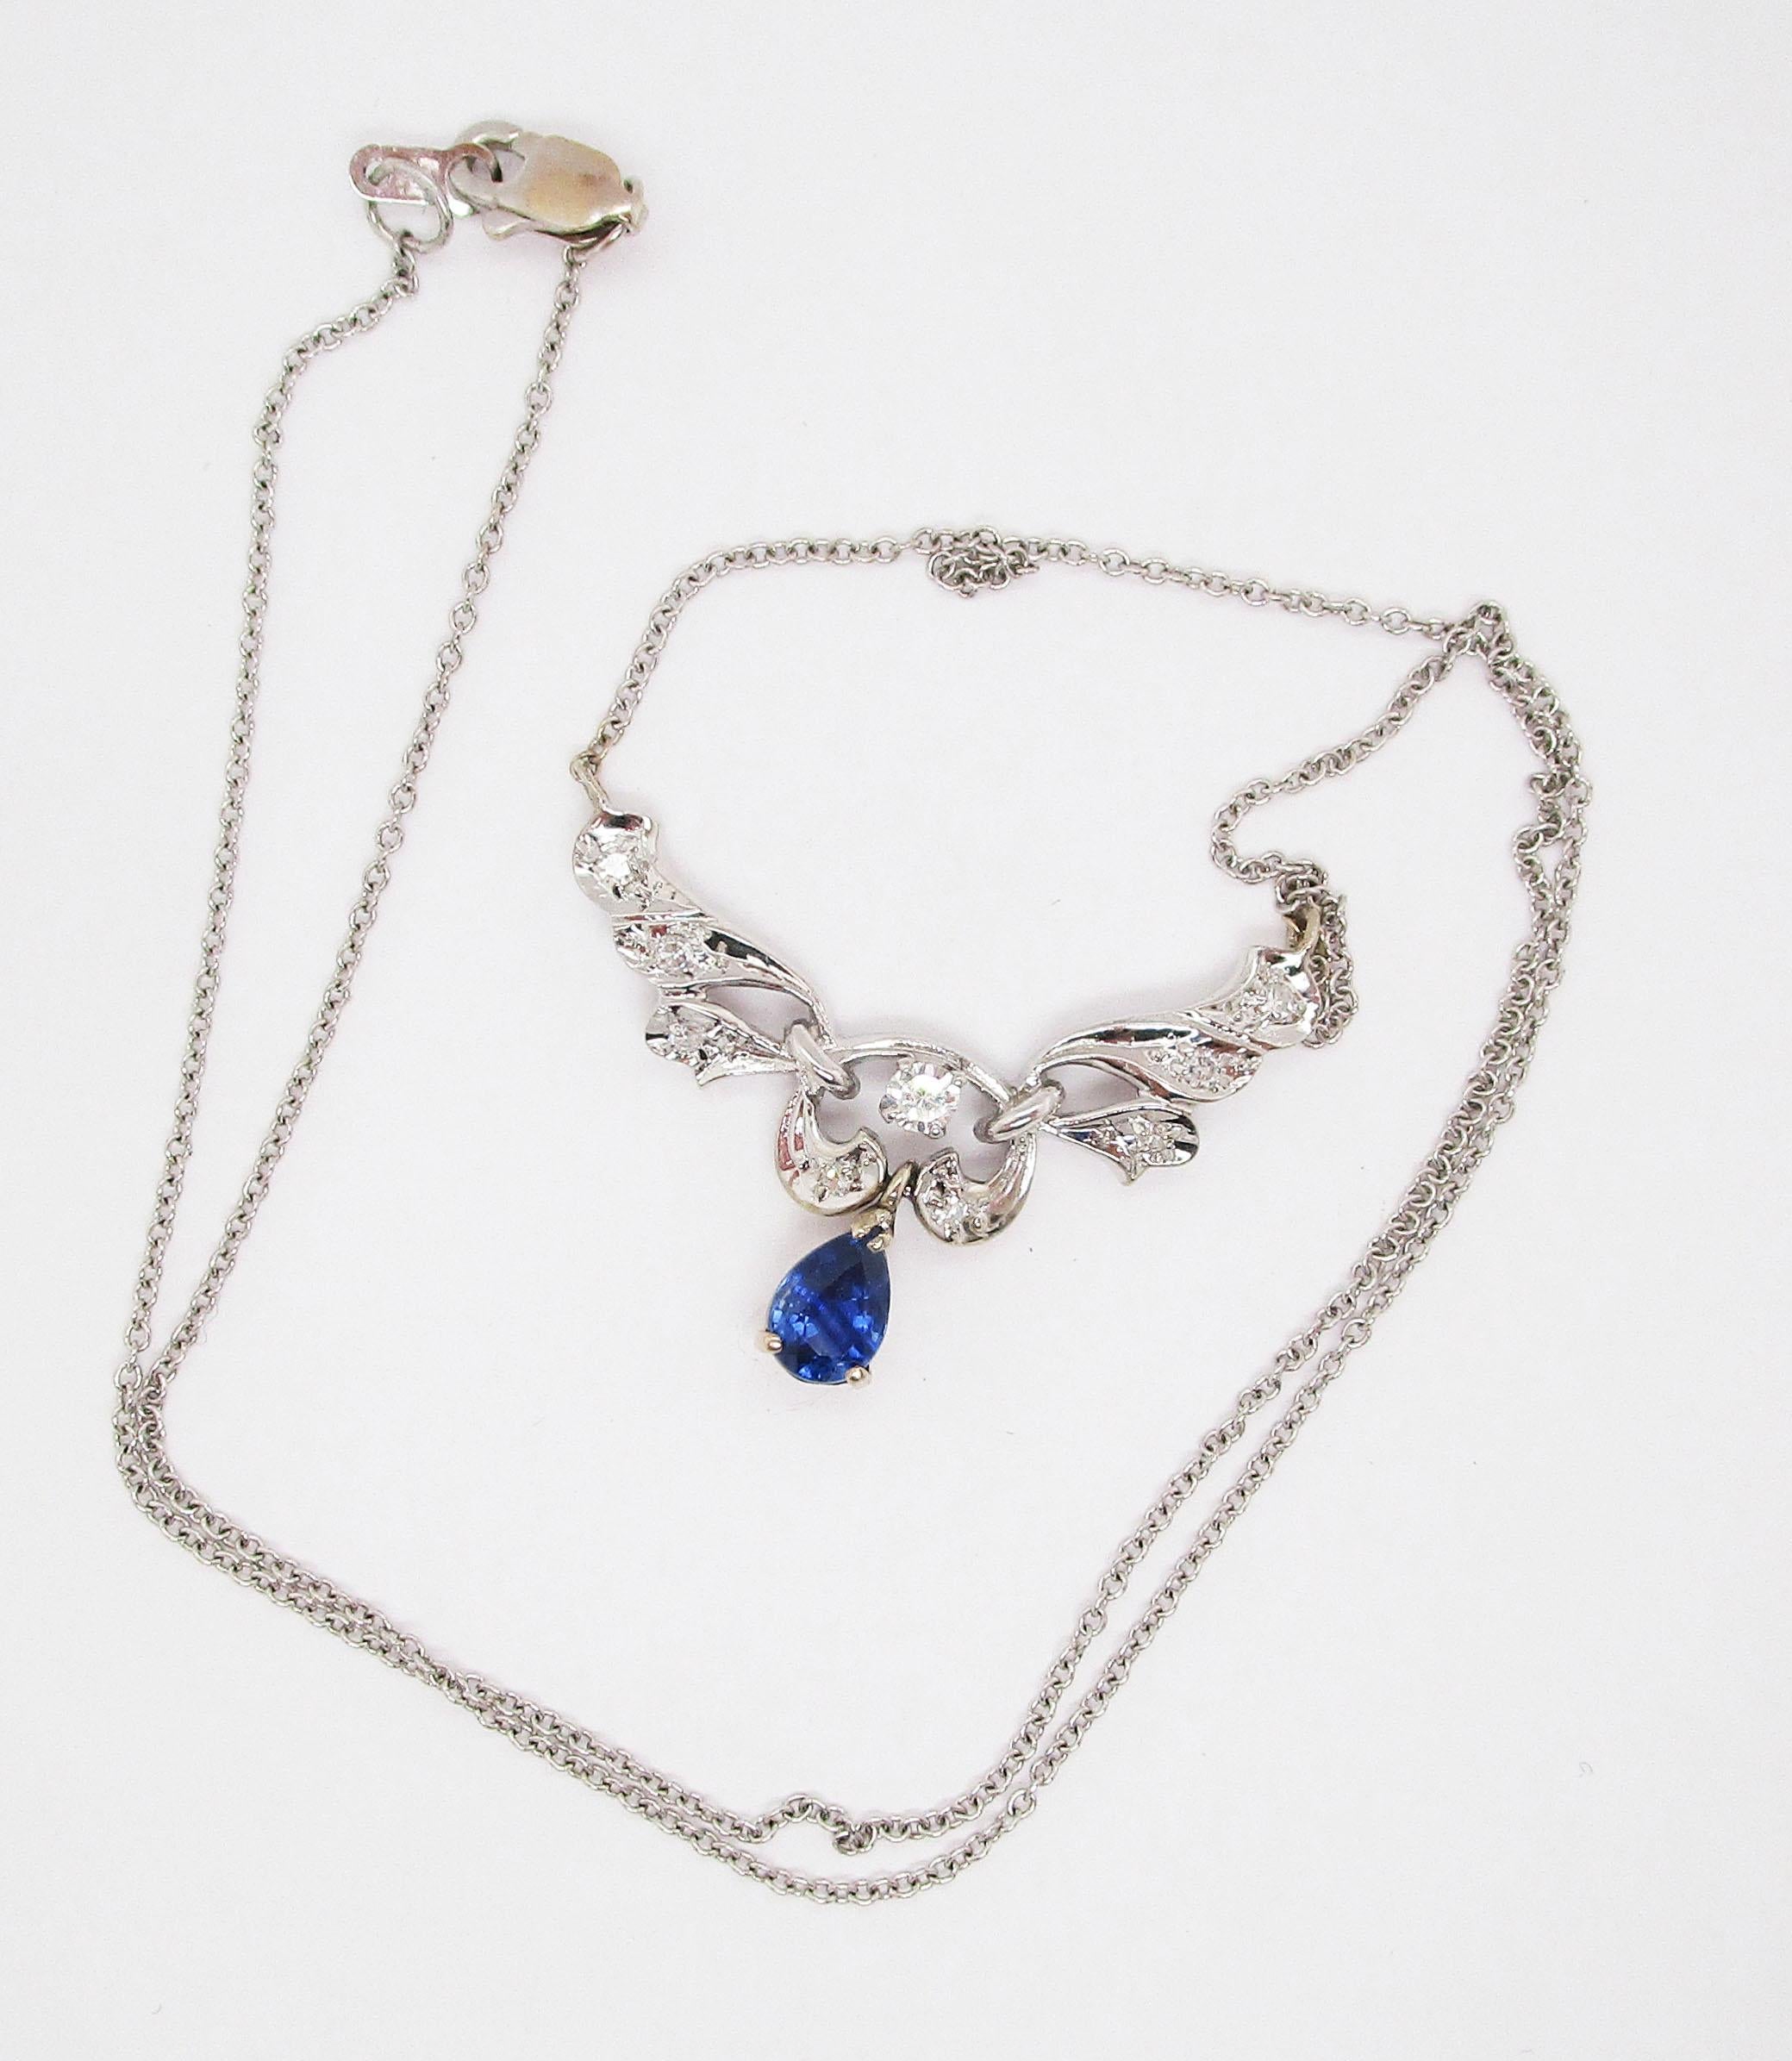 This necklace boasts a definitive design in 14k white gold and enhanced by diamonds and a stunning pear-shaped blue sapphire. The long layout of the necklace makes for a dramatic look on the neck. The brilliant white of the diamonds set against